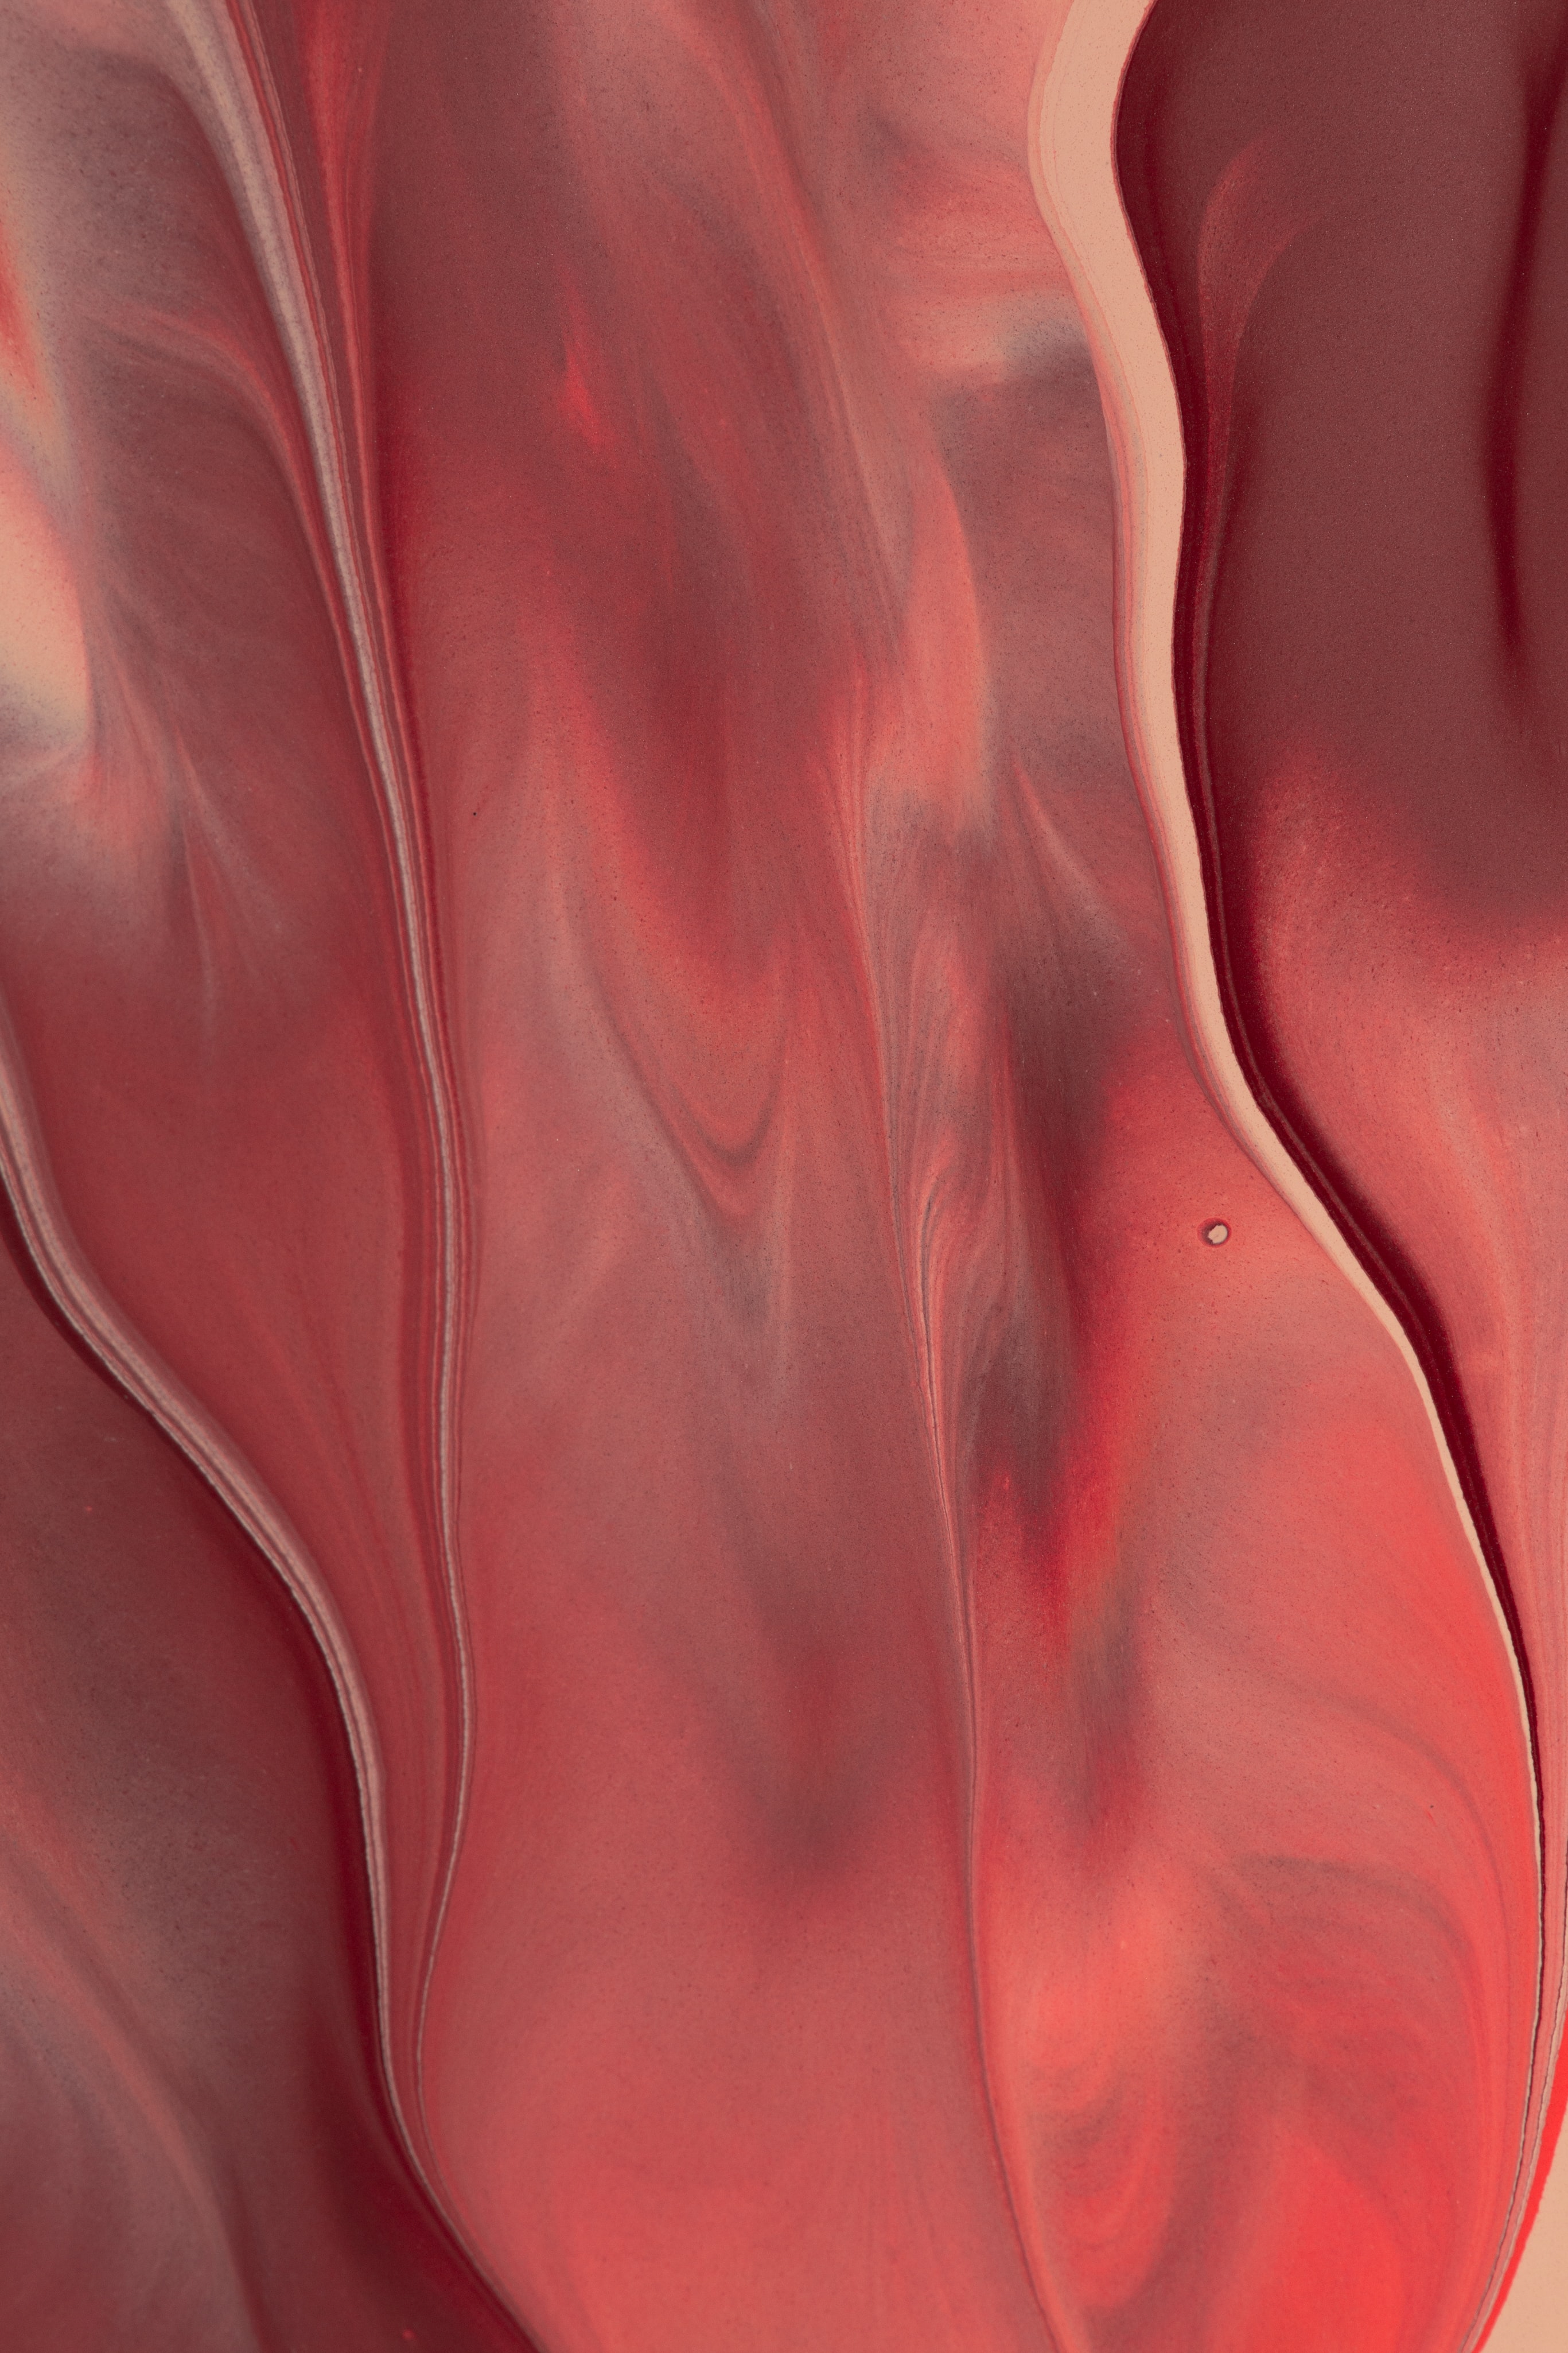 liquid, paint, red, abstract, divorces 4K